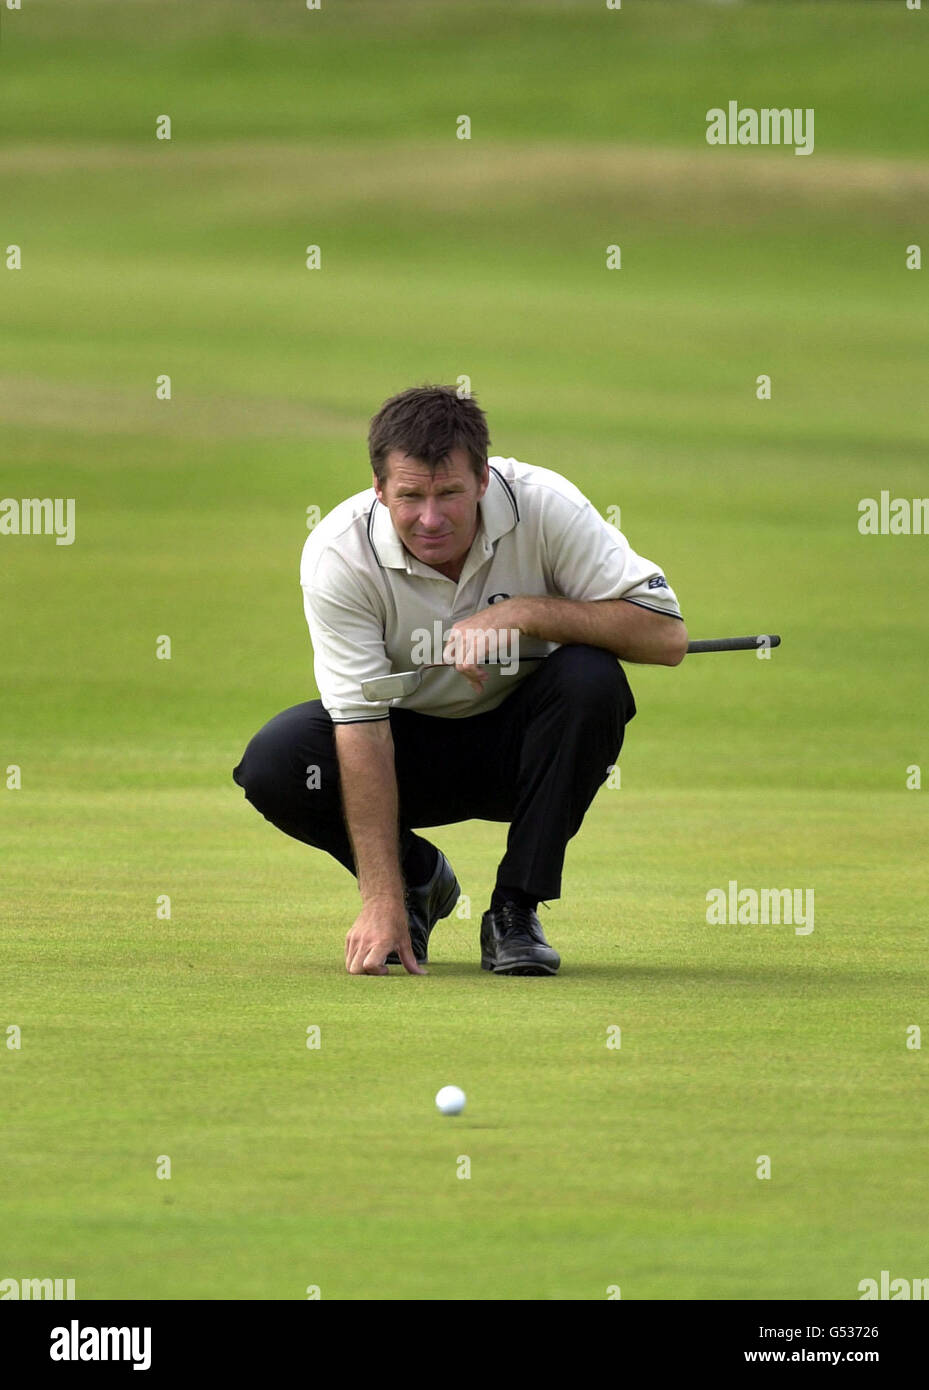 Open Golf St Andrews Faldo. England's Nick Faldo considers his putt on the 1st green at the Open Golf Championships at St Andrews, Scotland. Stock Photo